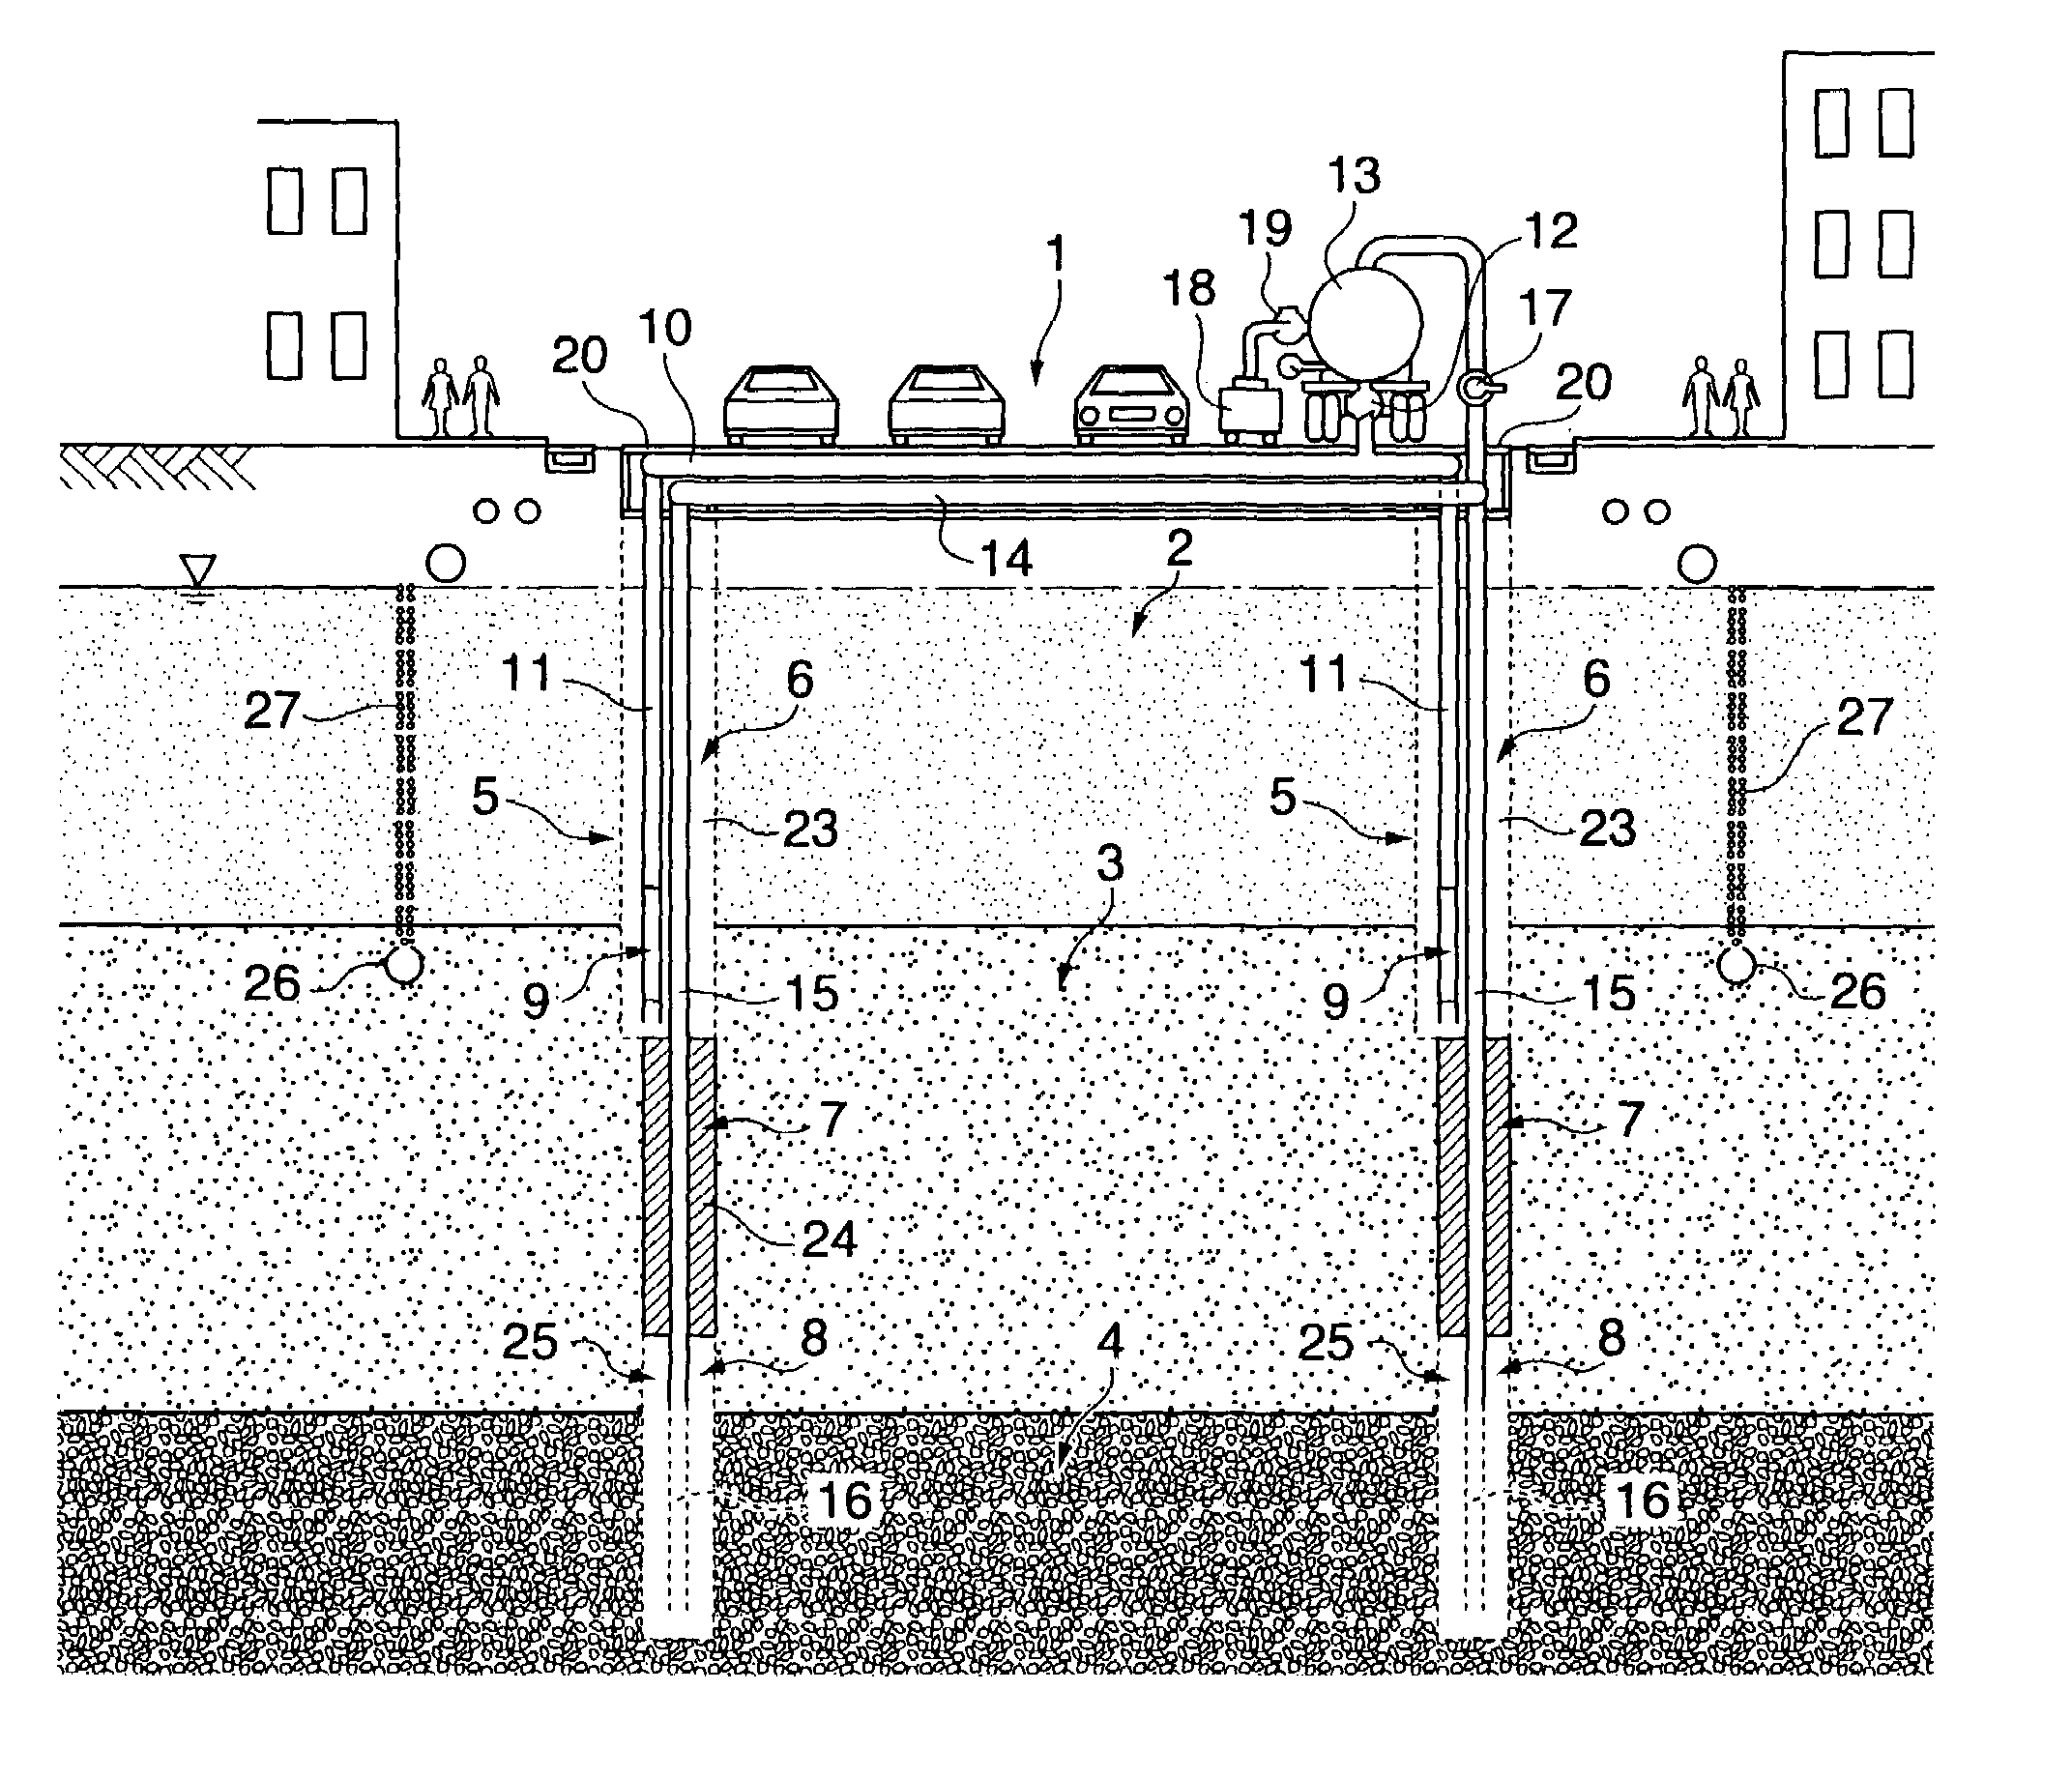 Method for preventing seismic liquefaction of ground in urbanized area and facilities used in this method